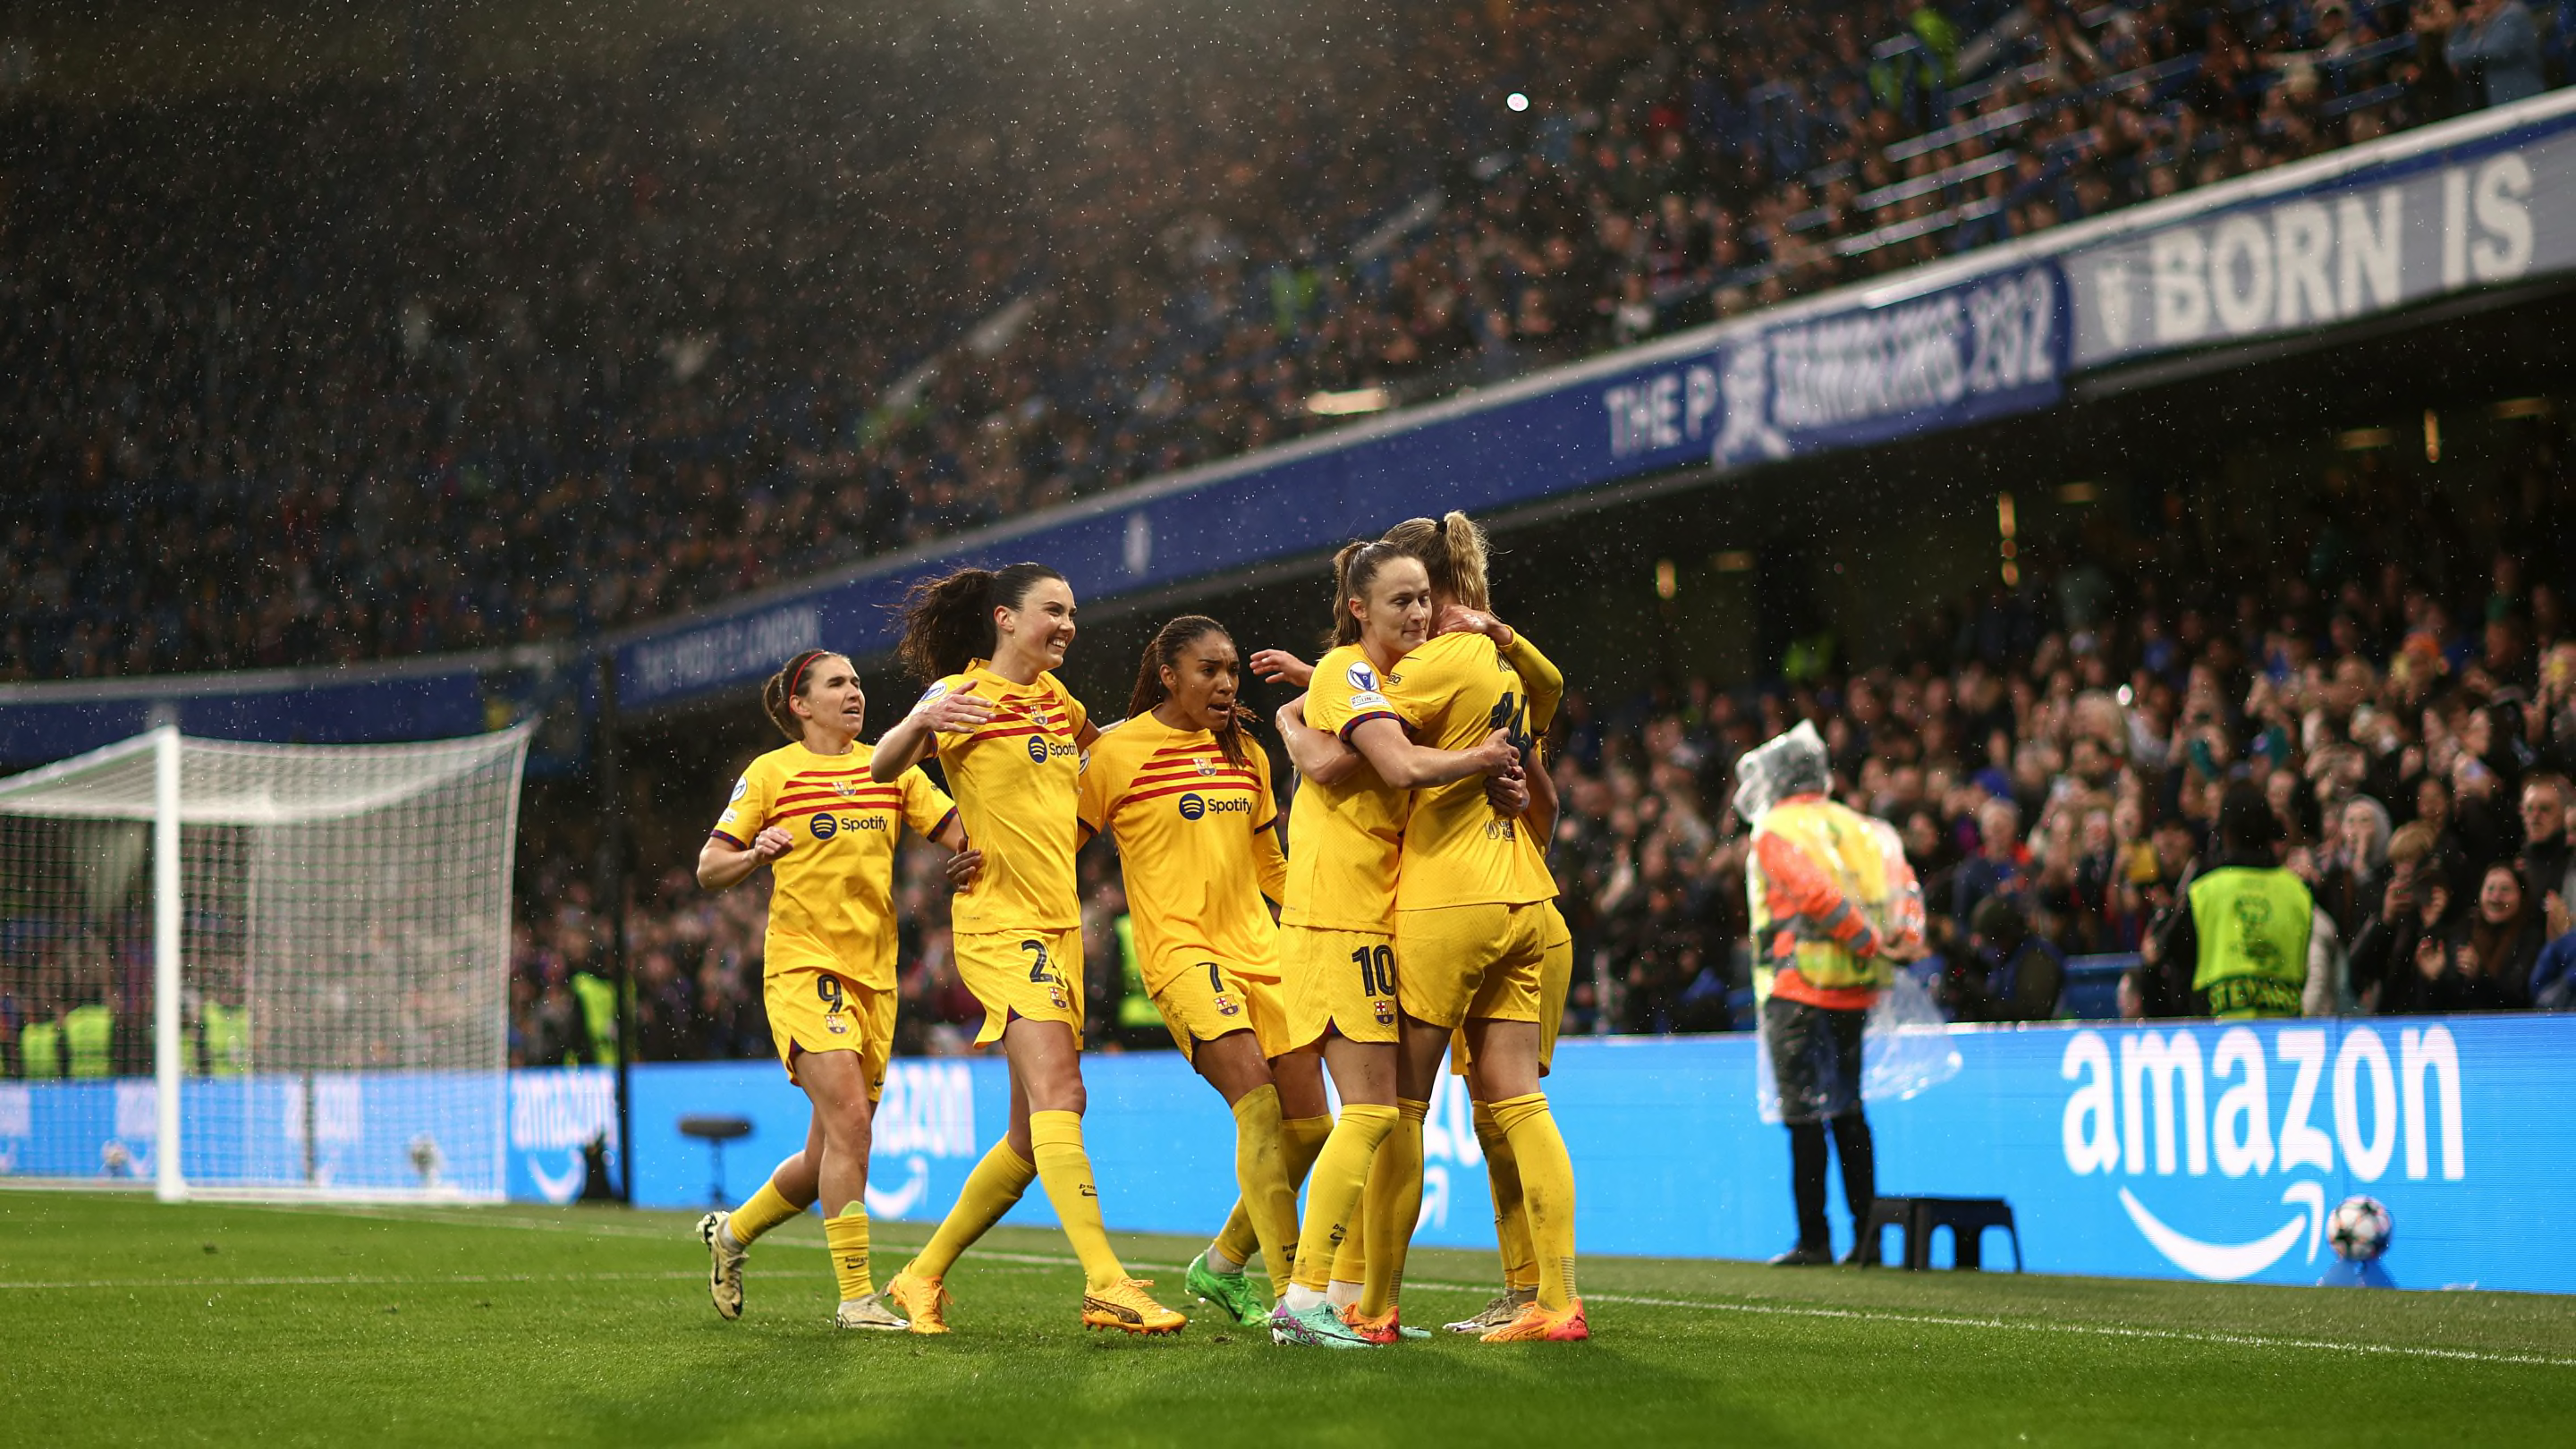 Chelsea 0-2 Barcelona (1-2 on agg): Player ratings as Barca reach Women's Champions League final